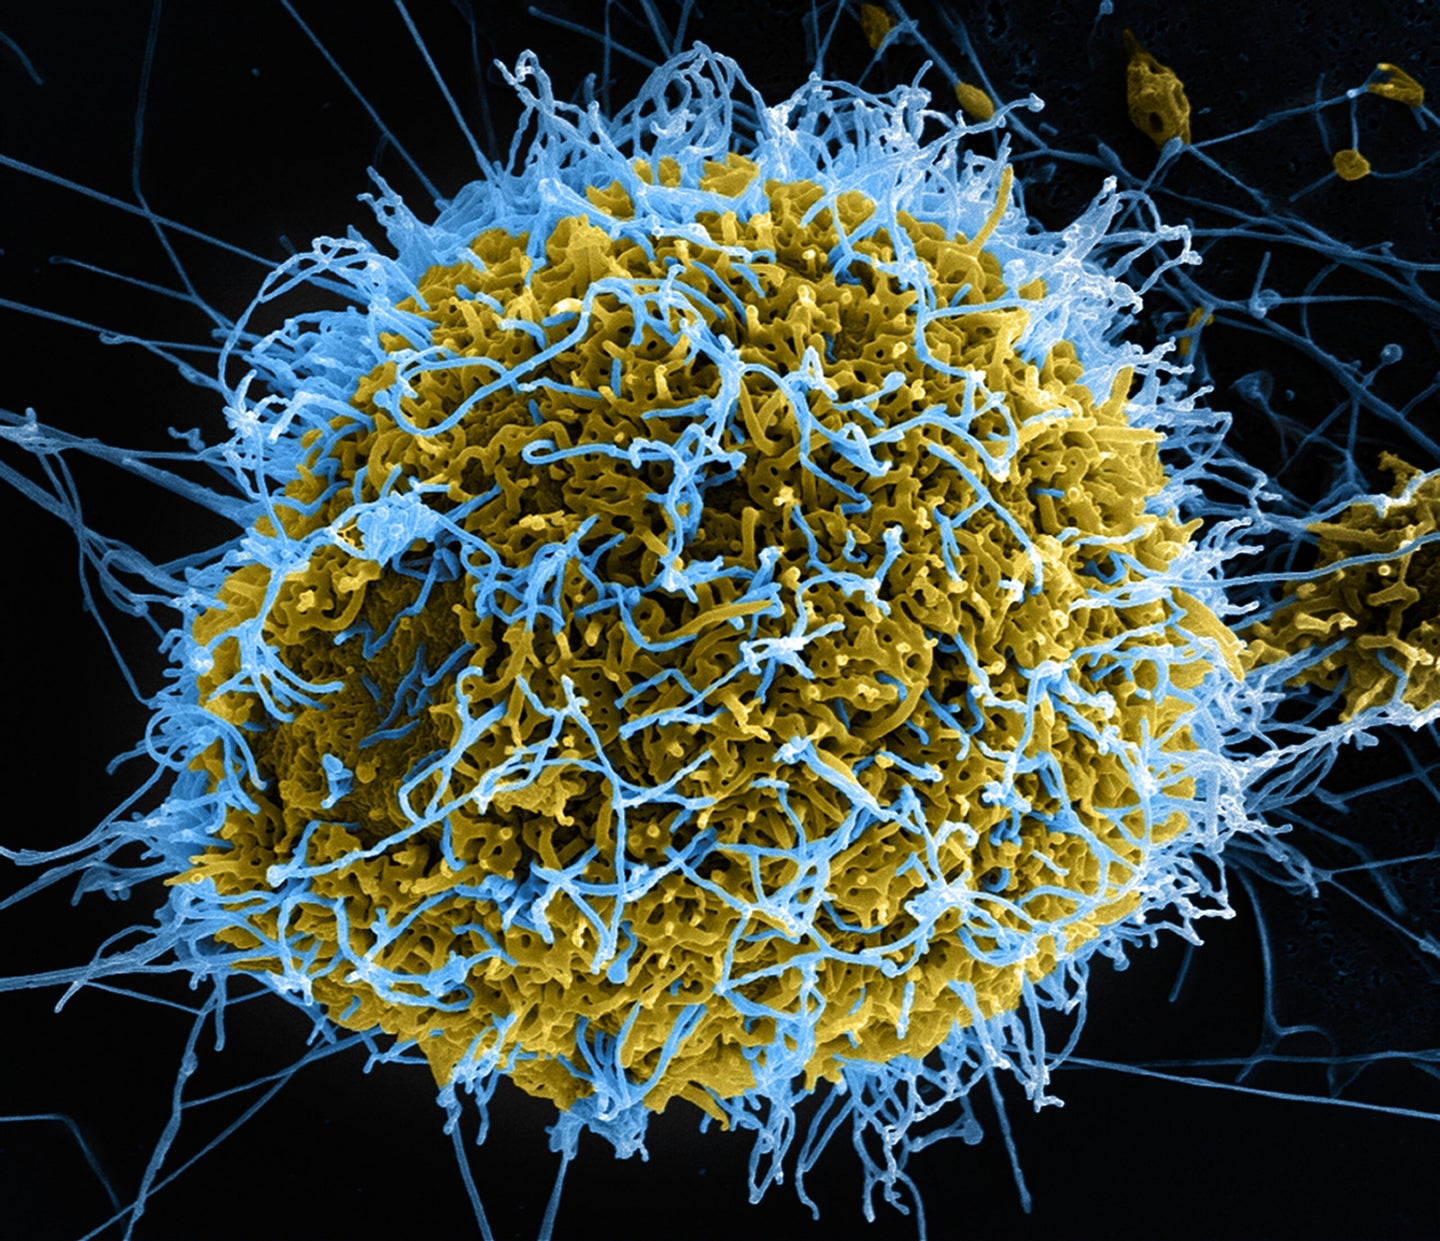 Colorized scanning electron micrograph of filamentous Ebola virus particles (blue) budding from a chronically infected VERO E6 cell (yellow-green).